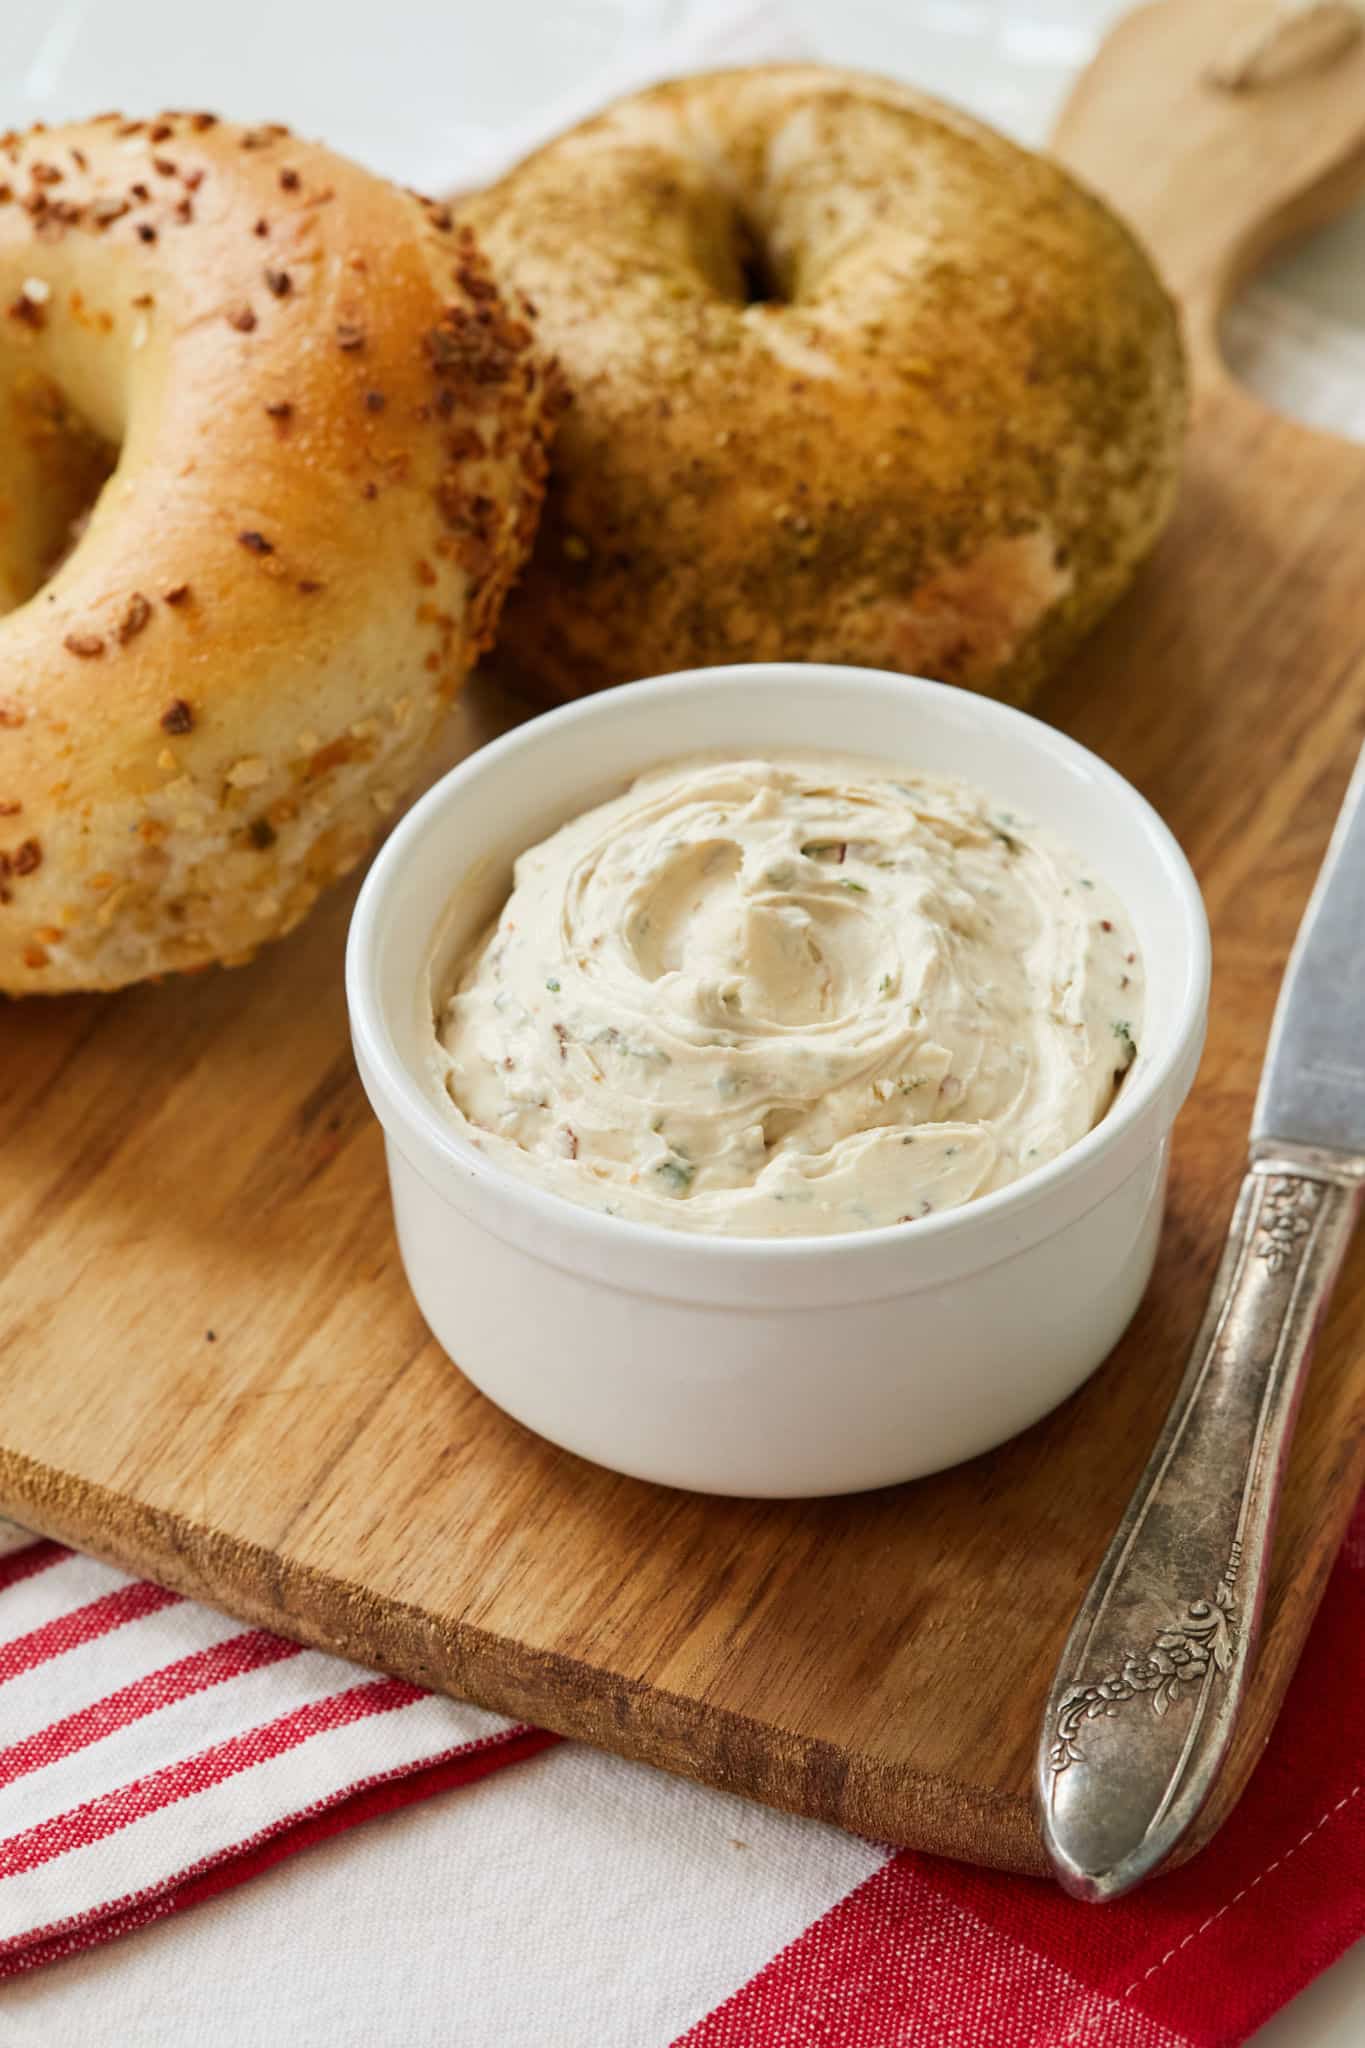 Homemade Sun-Dried Tomato Cream Cheese is served in a white dish next to a garlic bagel.